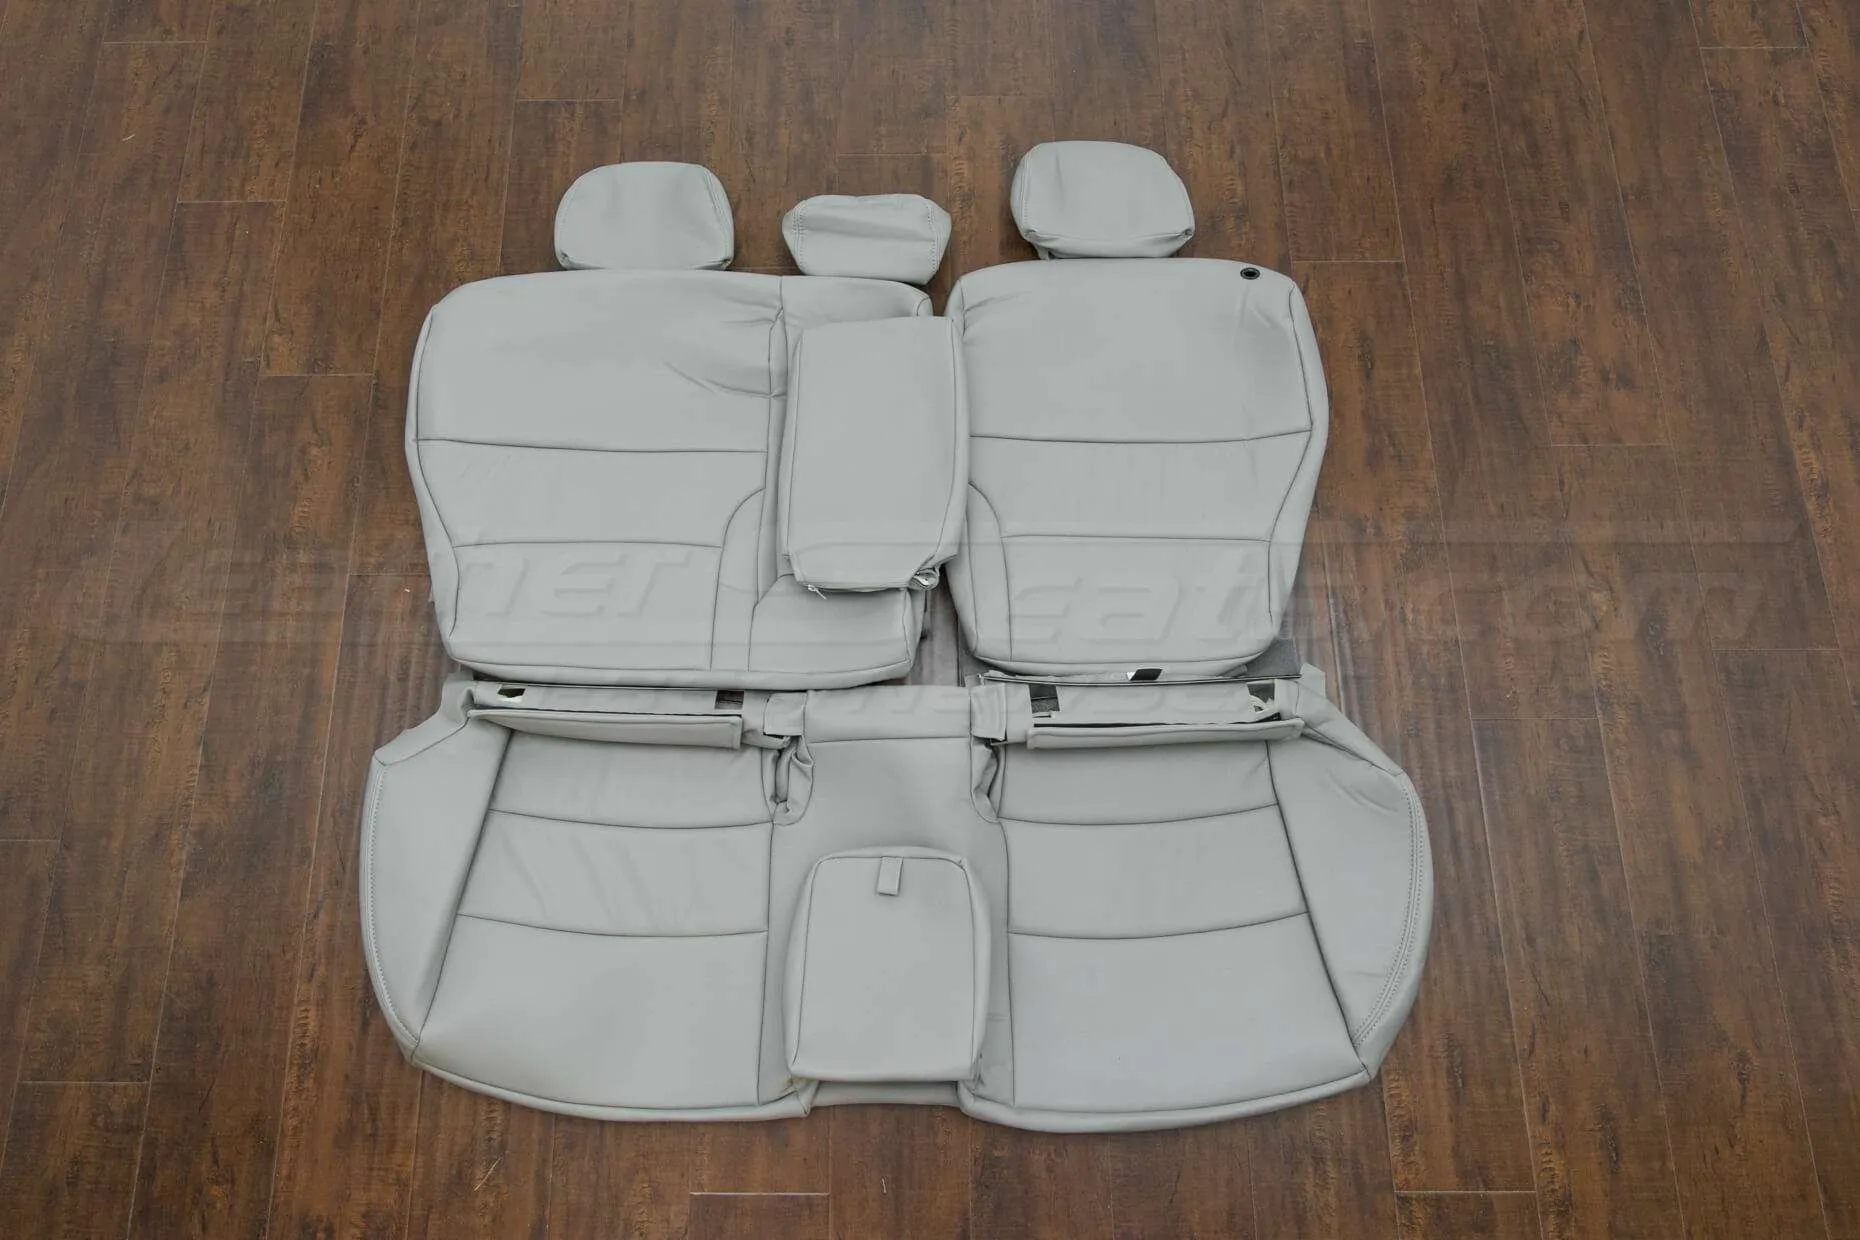 2011-2013 Subaru Forester Leather Seats - Ash - Installed Rear seat upholstery with armrest